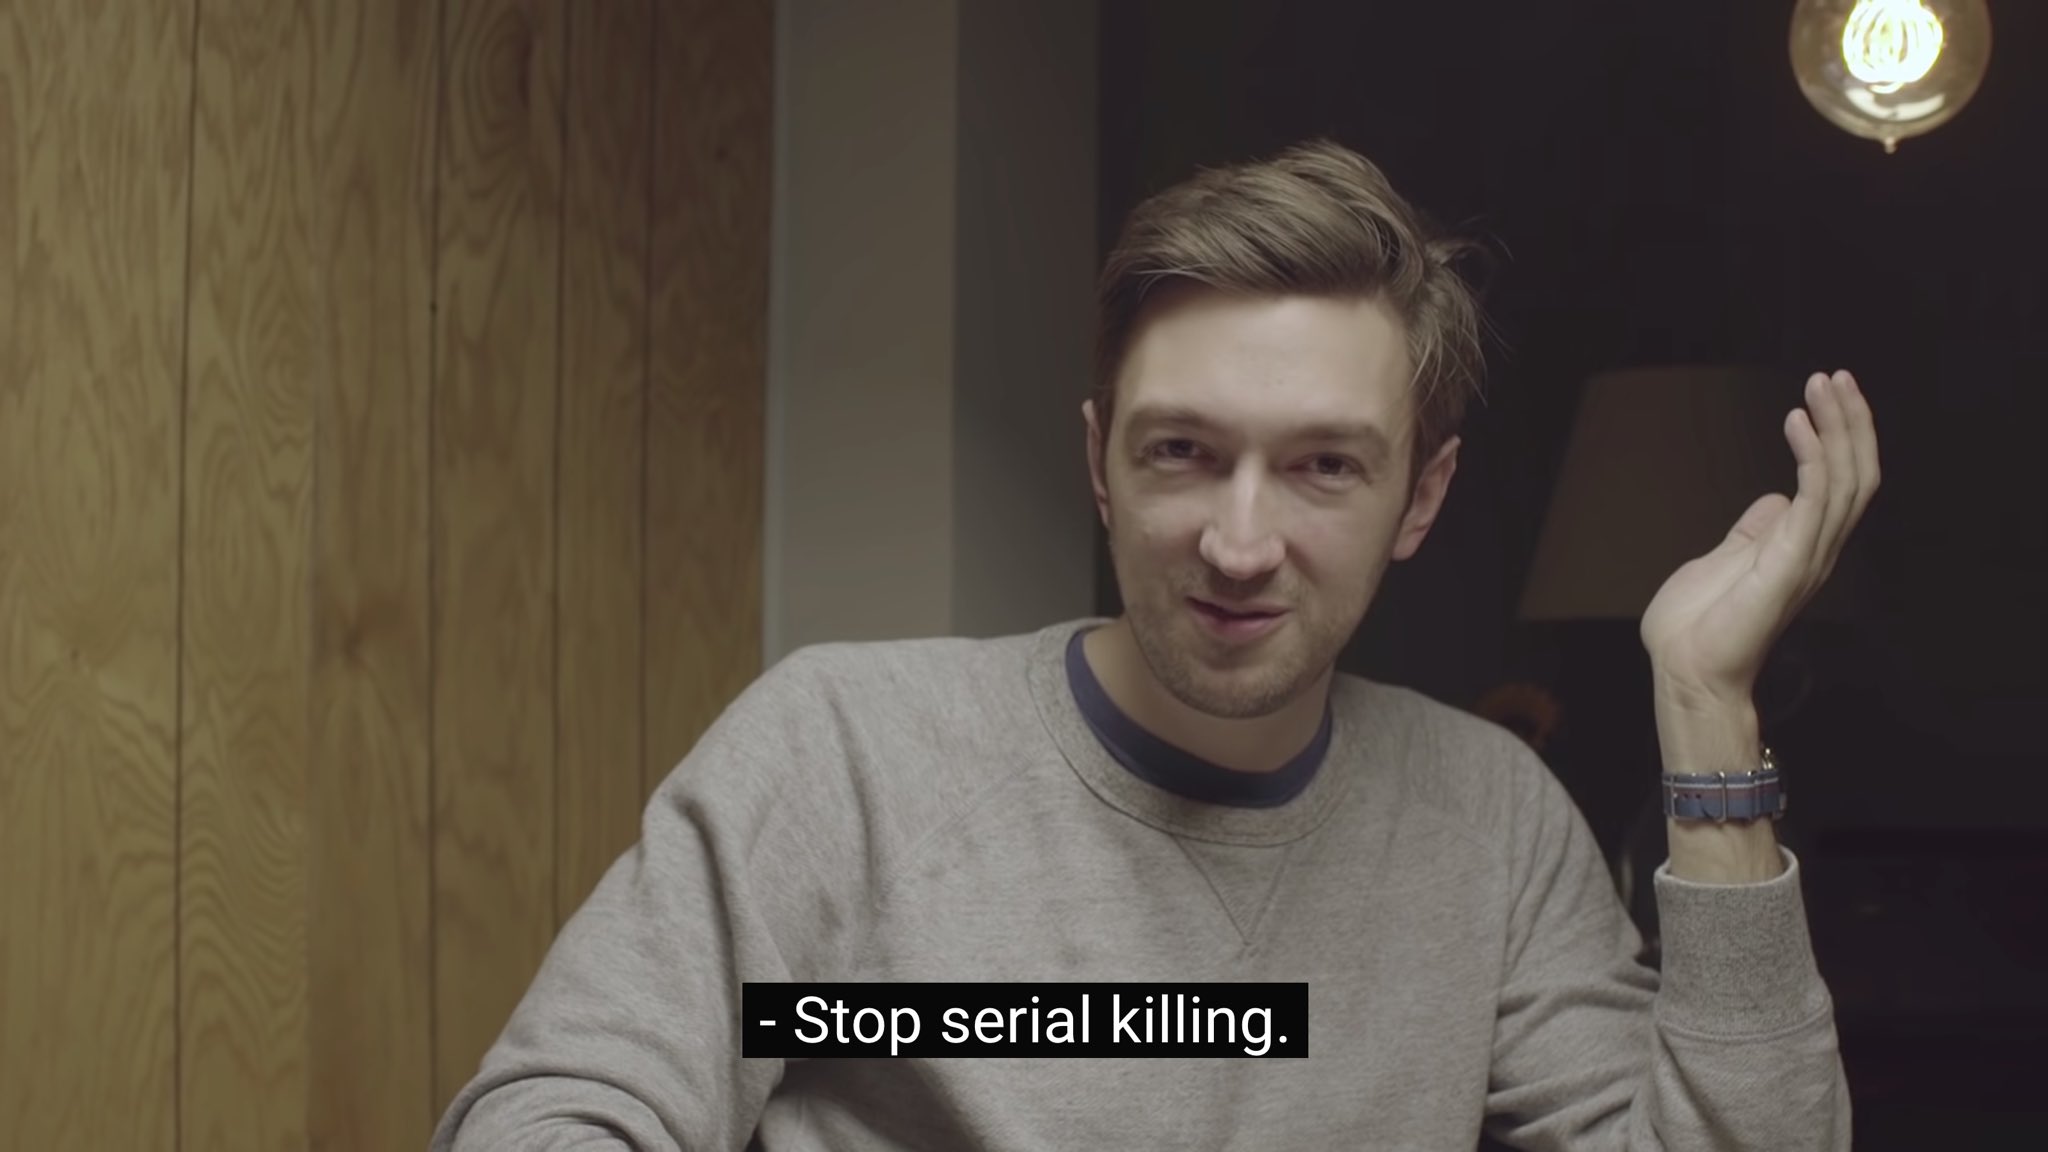 Buzzfeed Unsolved Wallpapers